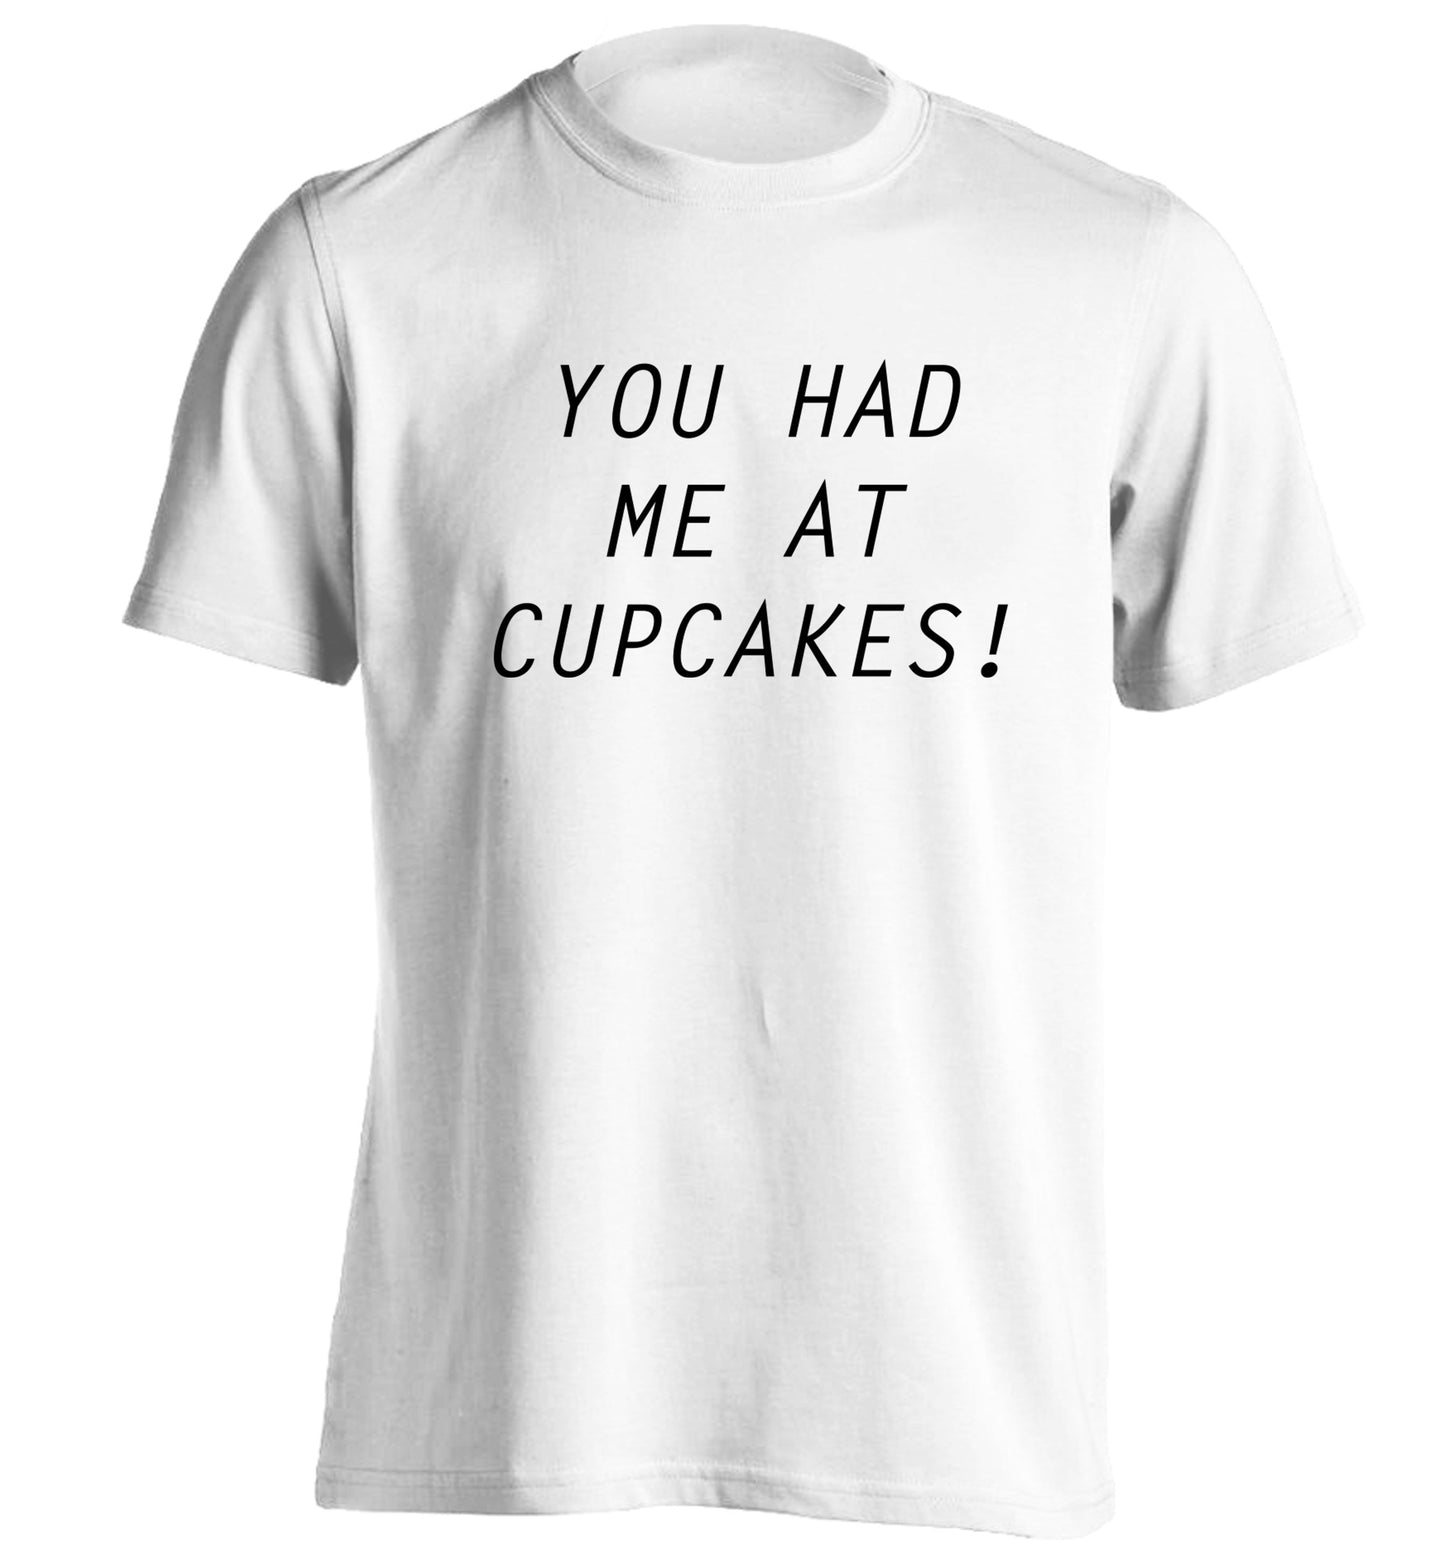 You had me at cupcakes adults unisex white Tshirt 2XL